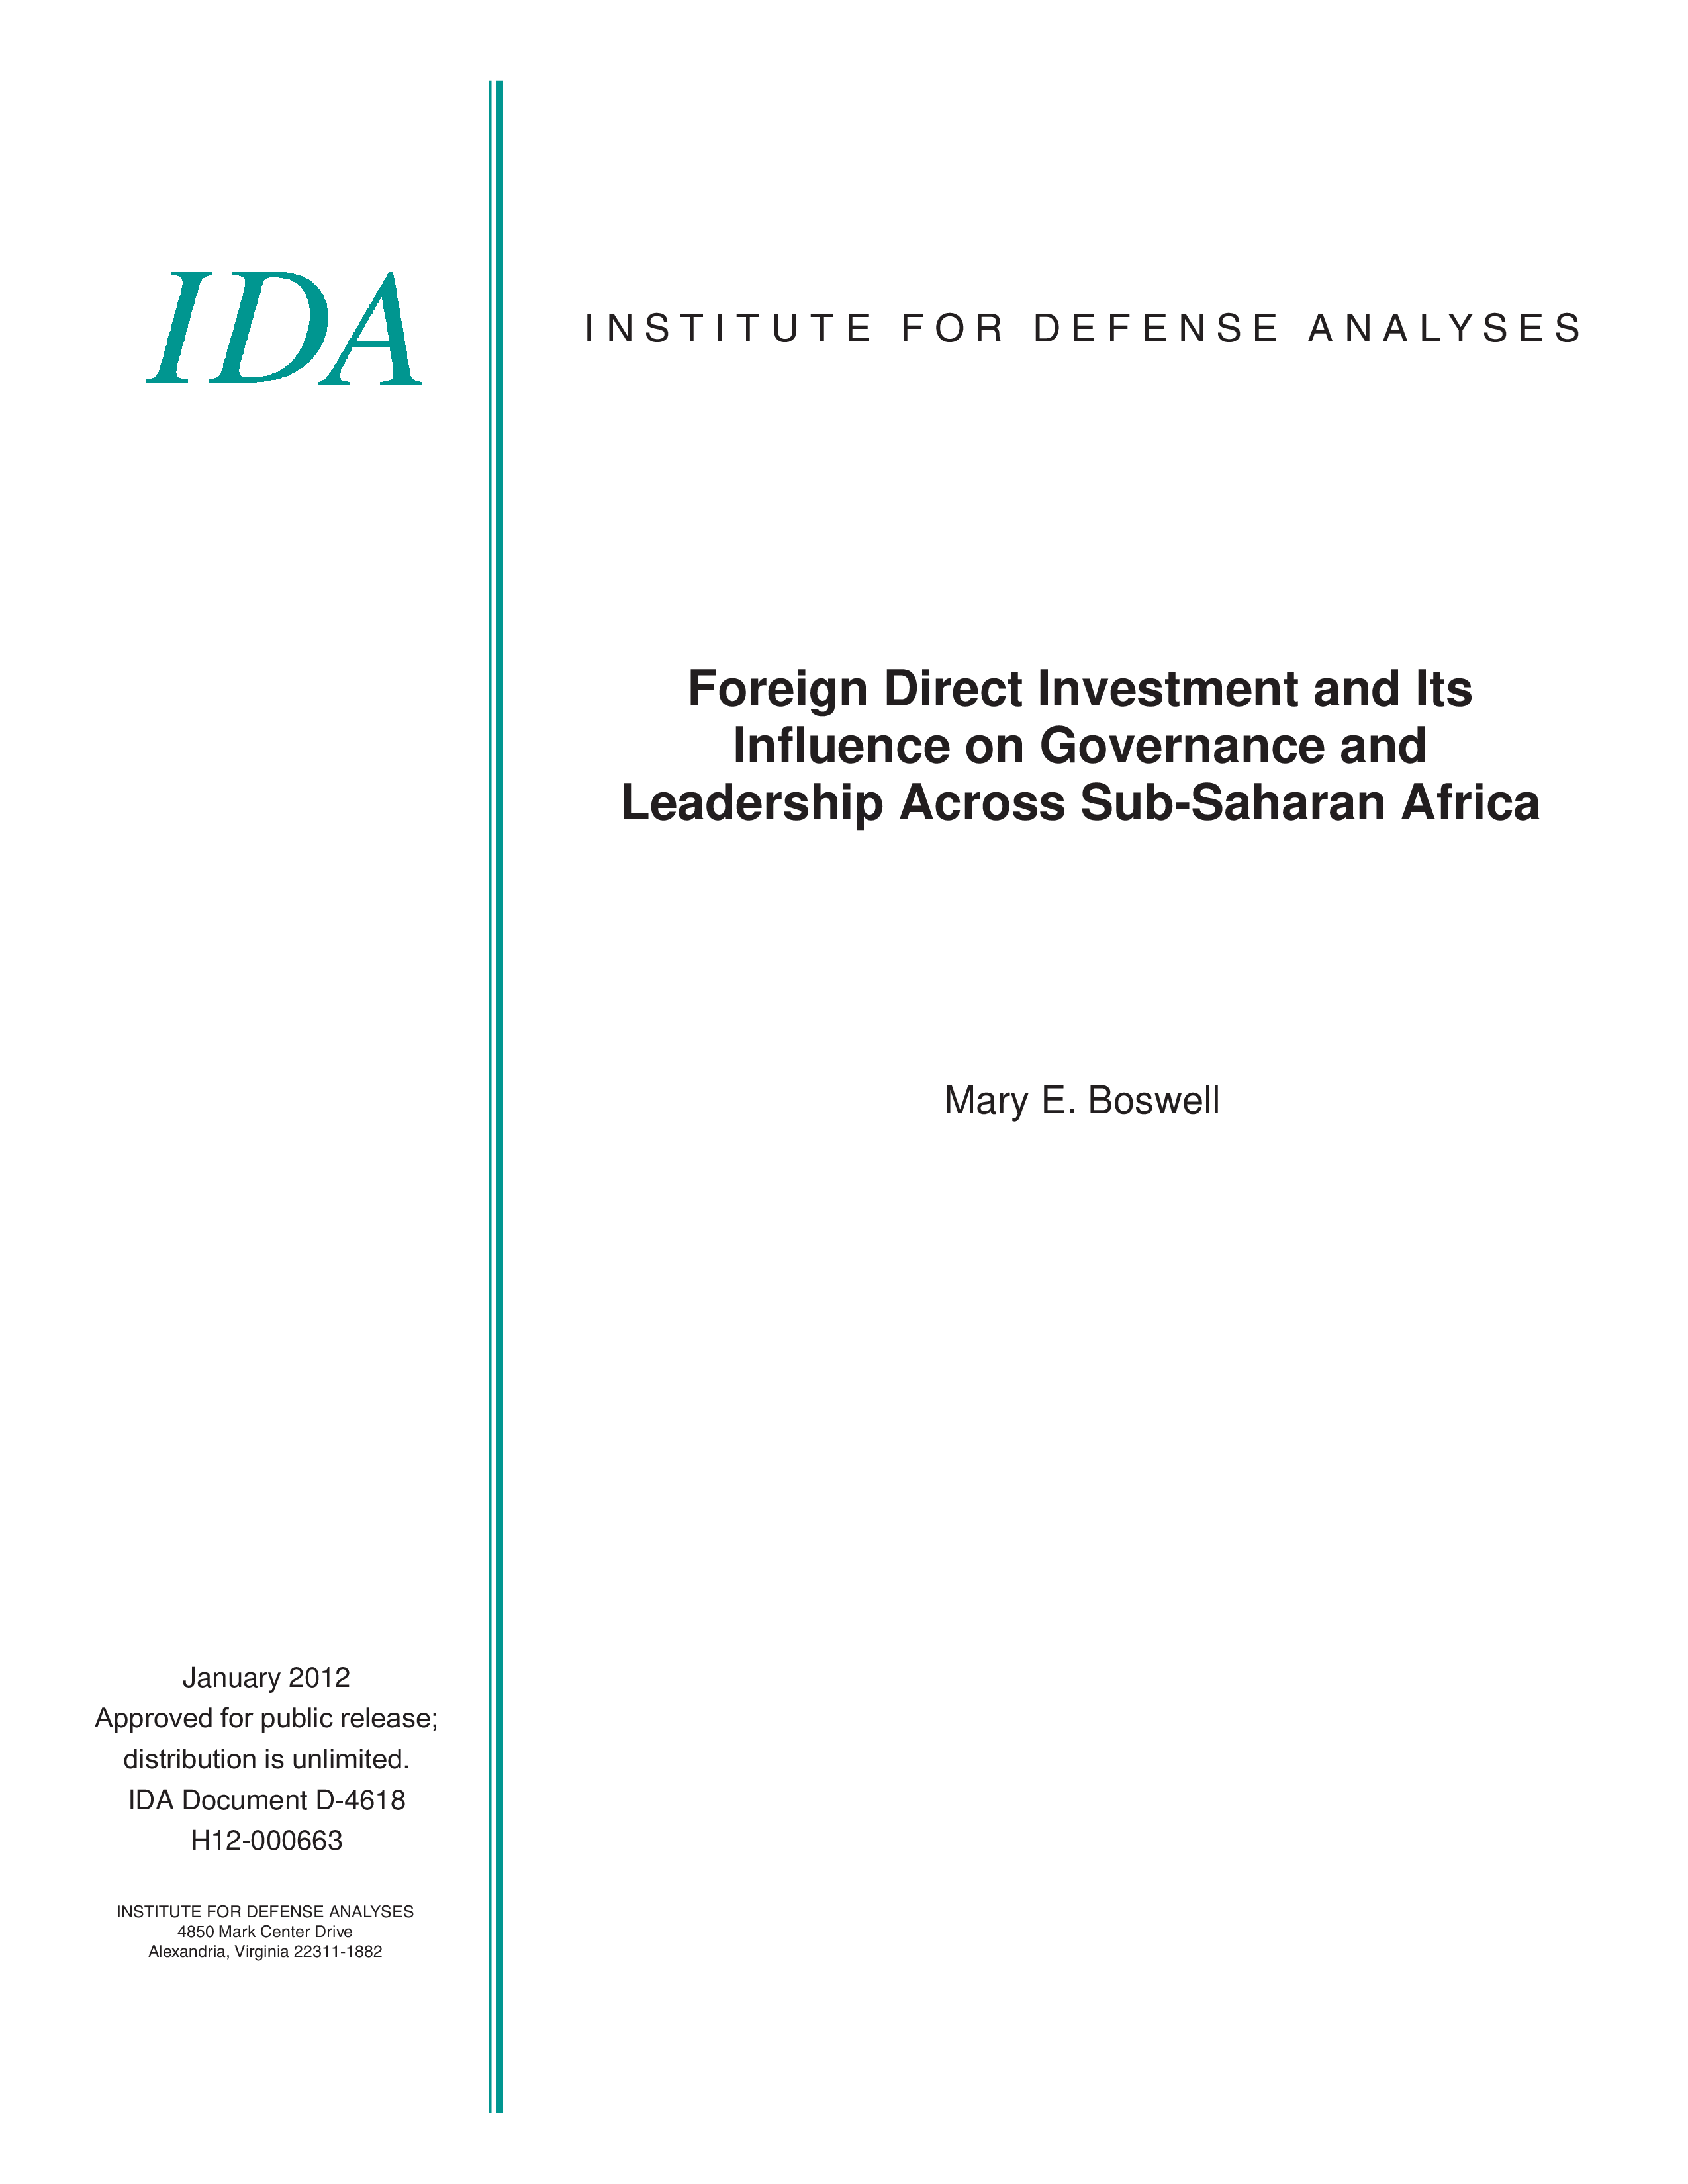 Foreign Direct Investment and Its Influence on Governance and Leadership Across Sub-Saharan Africa